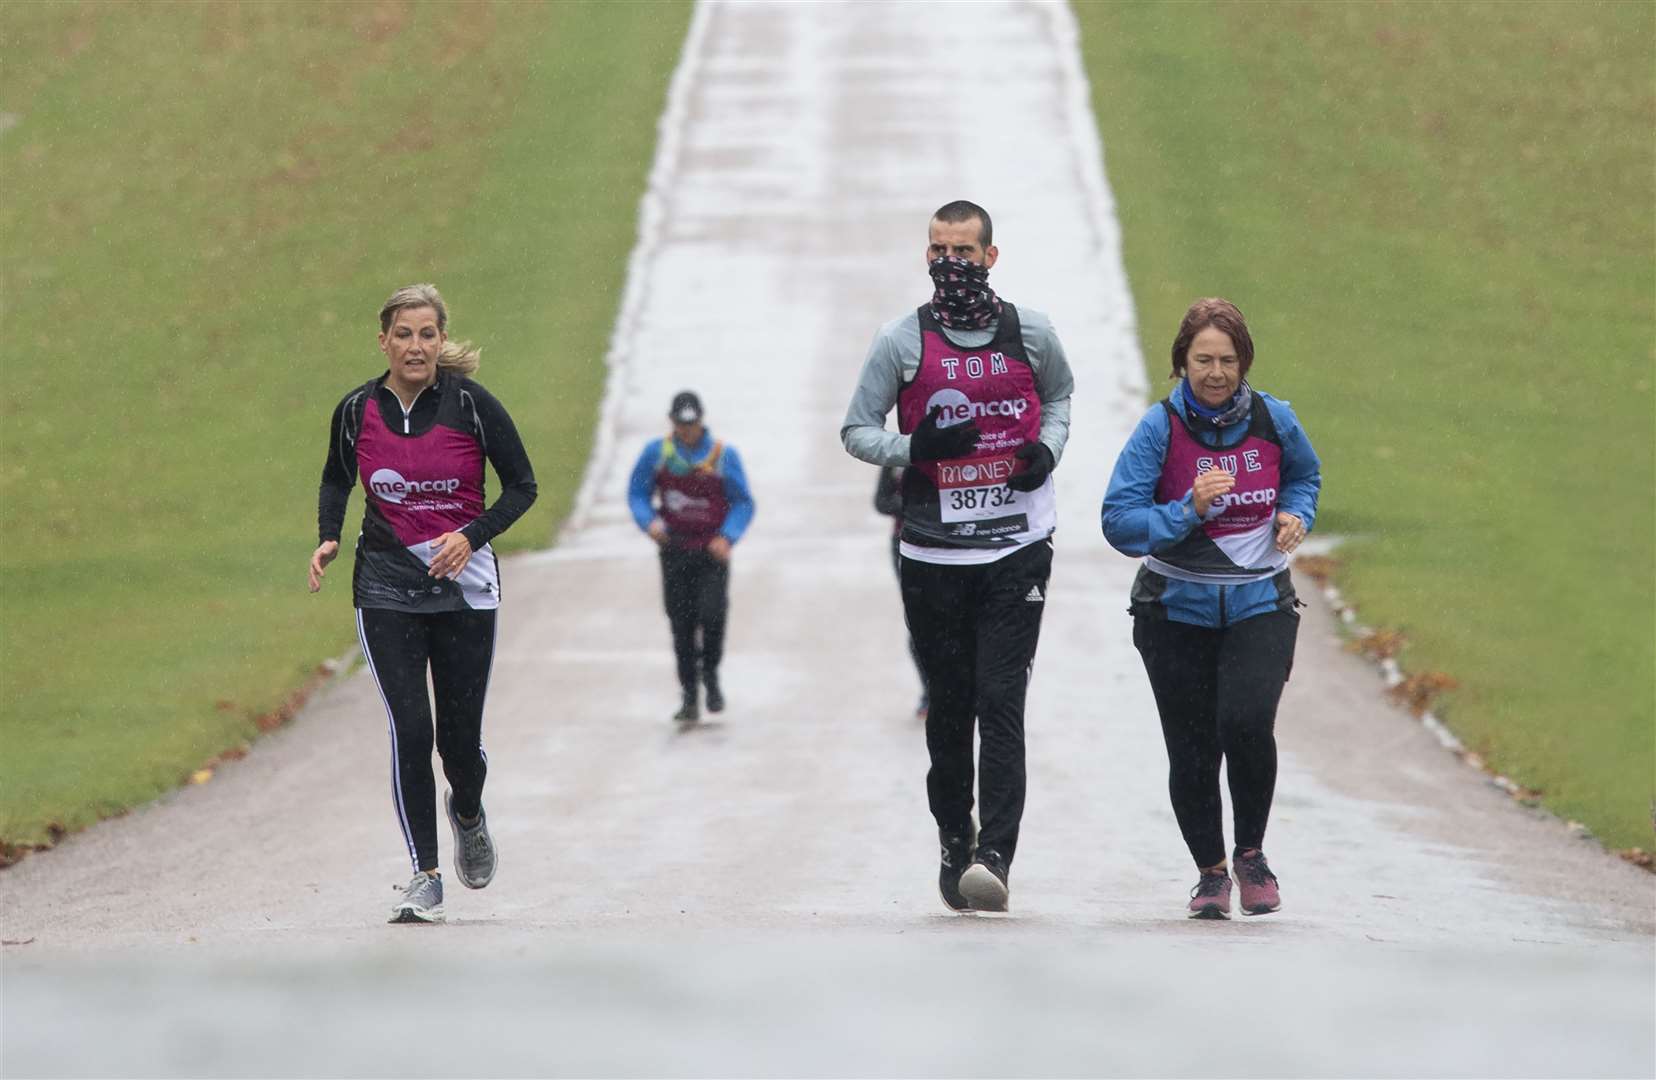 The Countess of Wessex (left) joined Tomas Cardillo-Zallo and his mother Sue, acting as his guide runner, for the first 1.5 miles of their virtual London Marathon in Windsor (David Rose/The Daily Telegraph/PA)